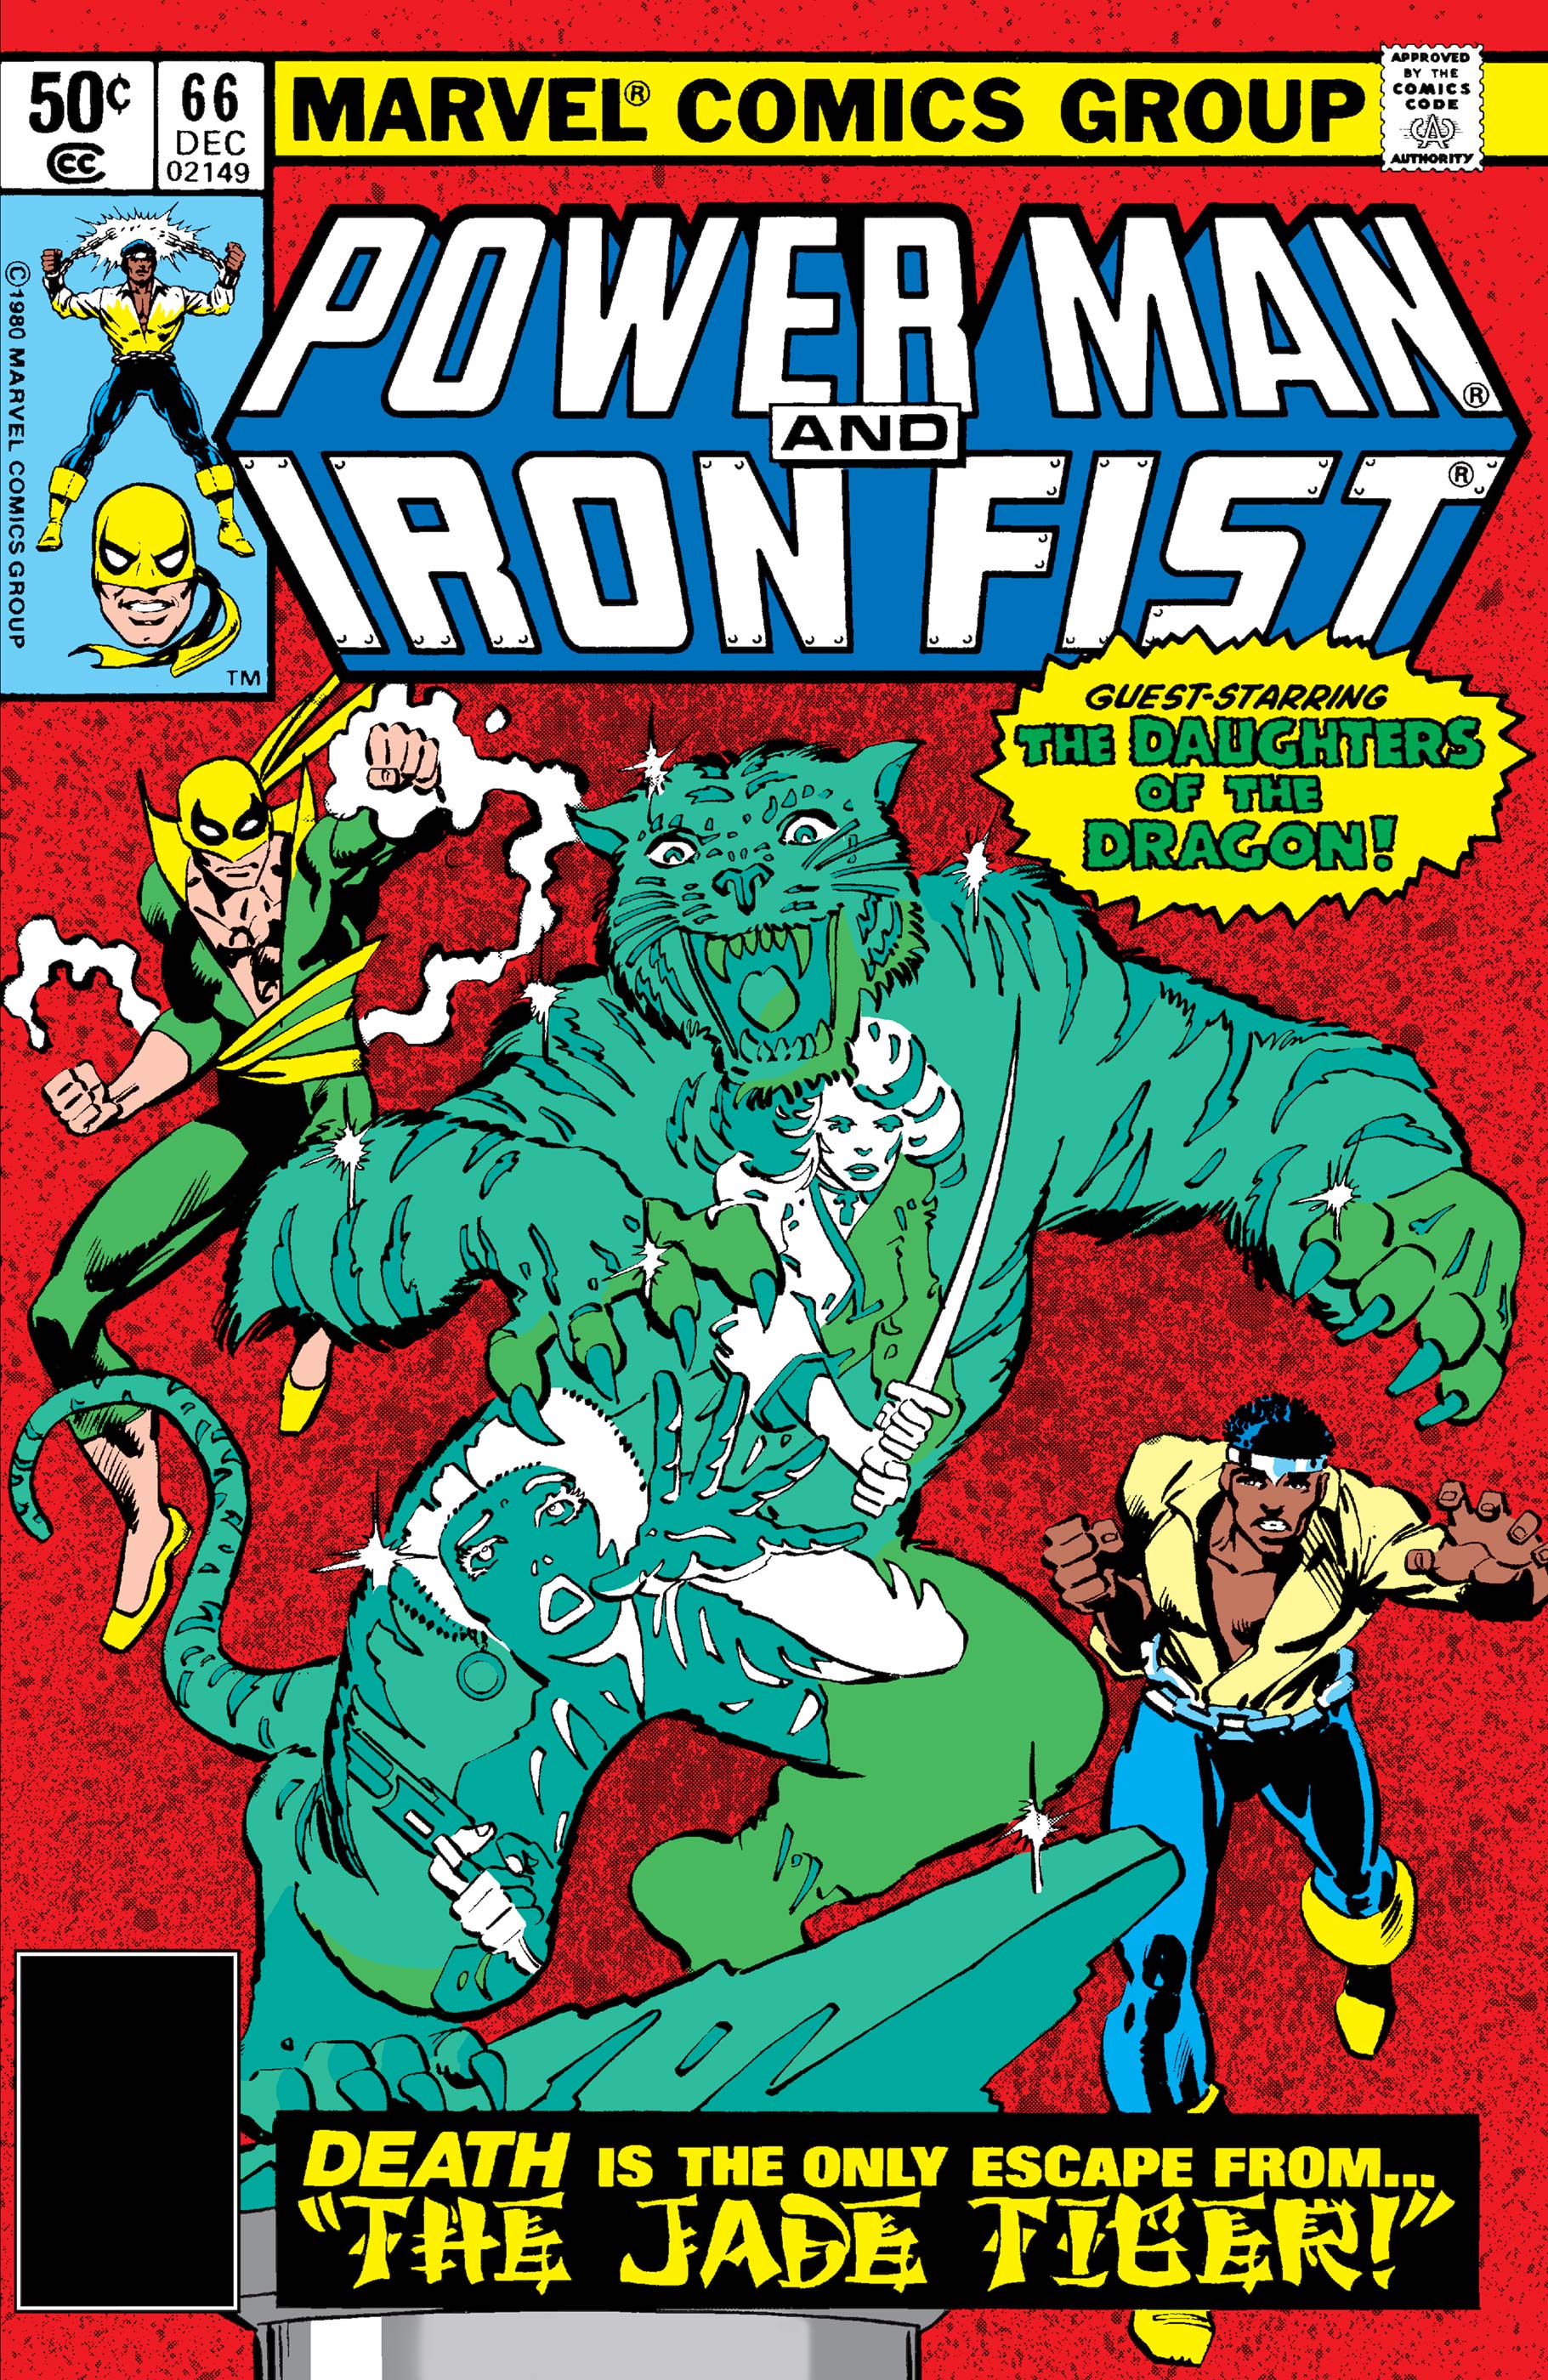 Power Man and Iron Fist (1978) #66